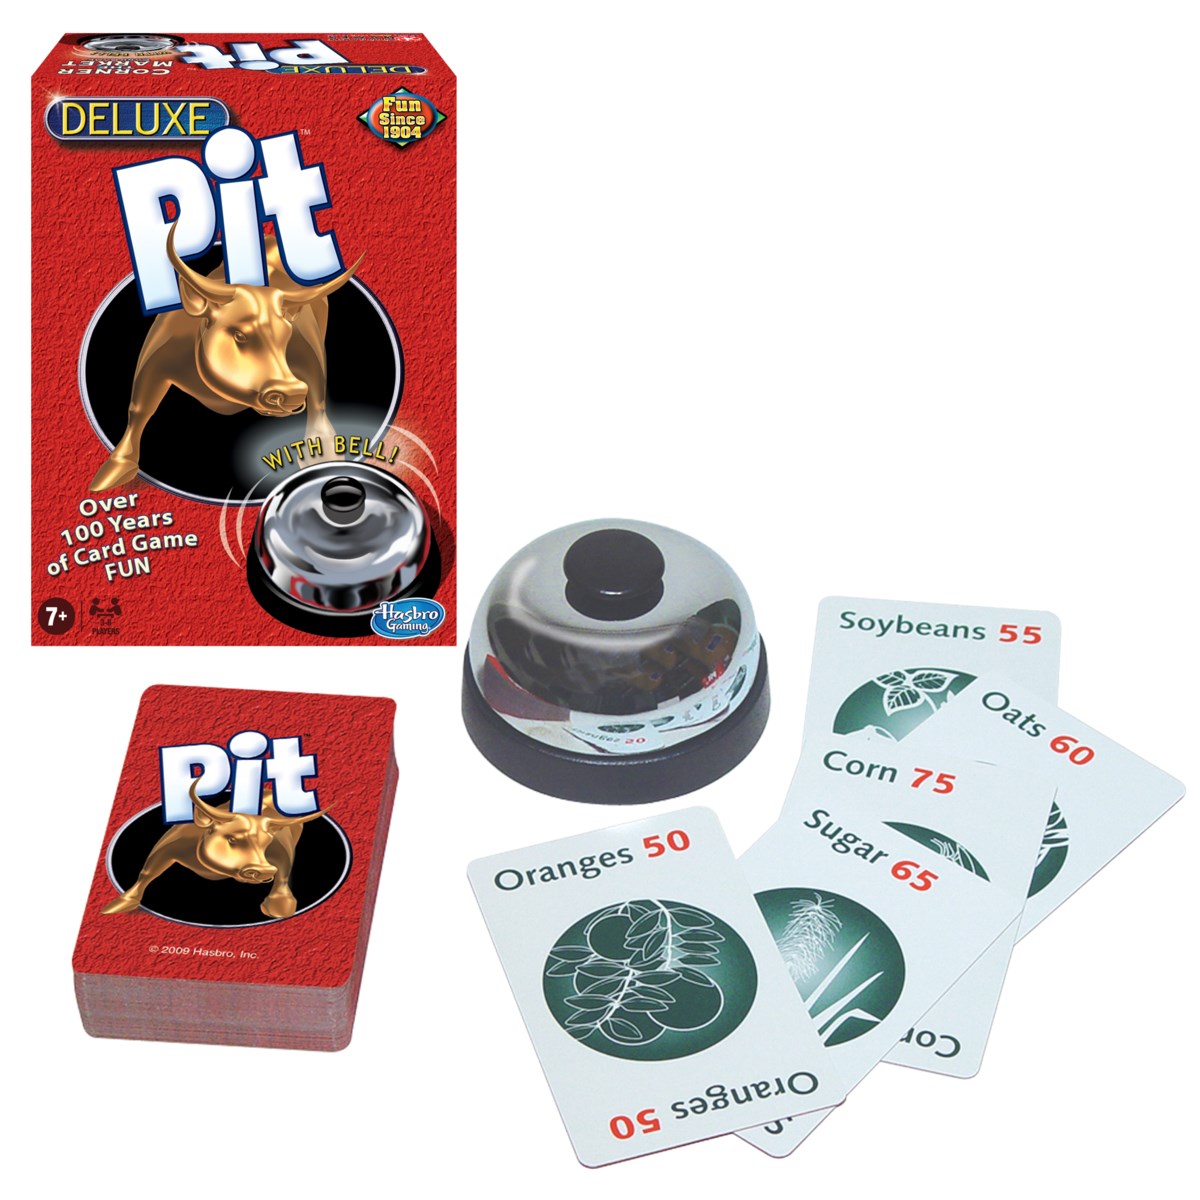 DELUXE PIT CARD GAME (6) ENG